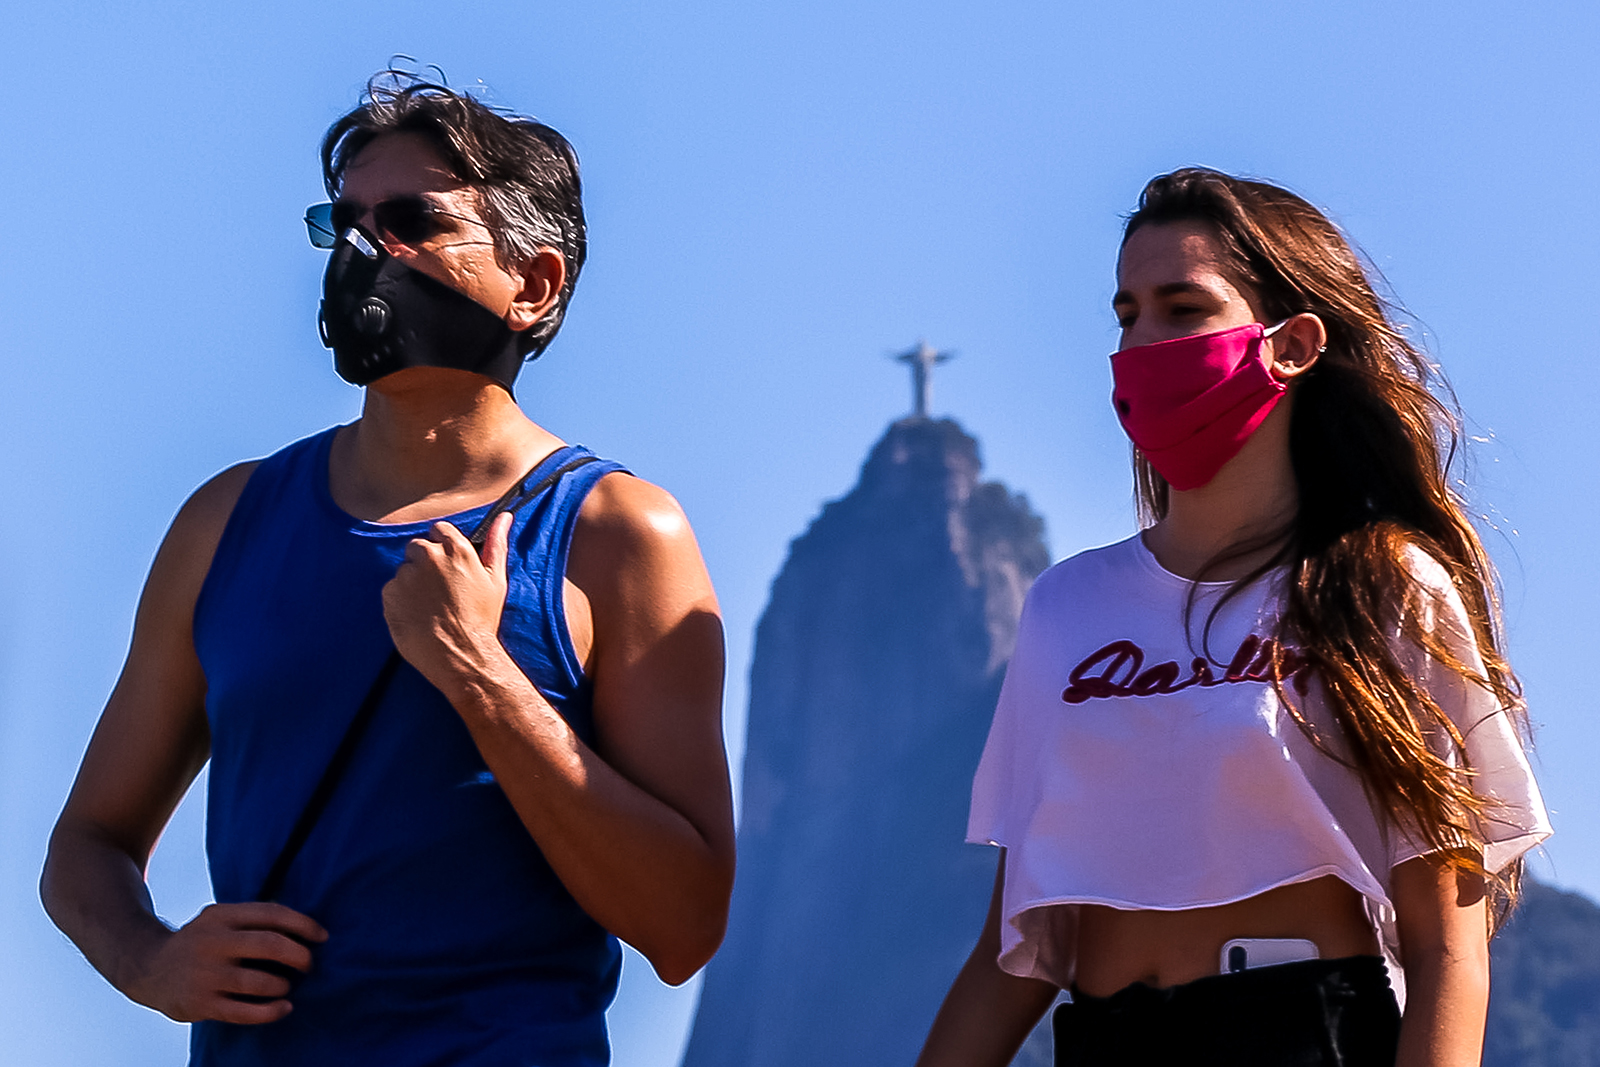 People wearing face masks enjoy the weather at Botafogo Cove, as the Christ the Redeemer statue is seen in the distance, on July 5, in Rio de Janeiro, Brazil.